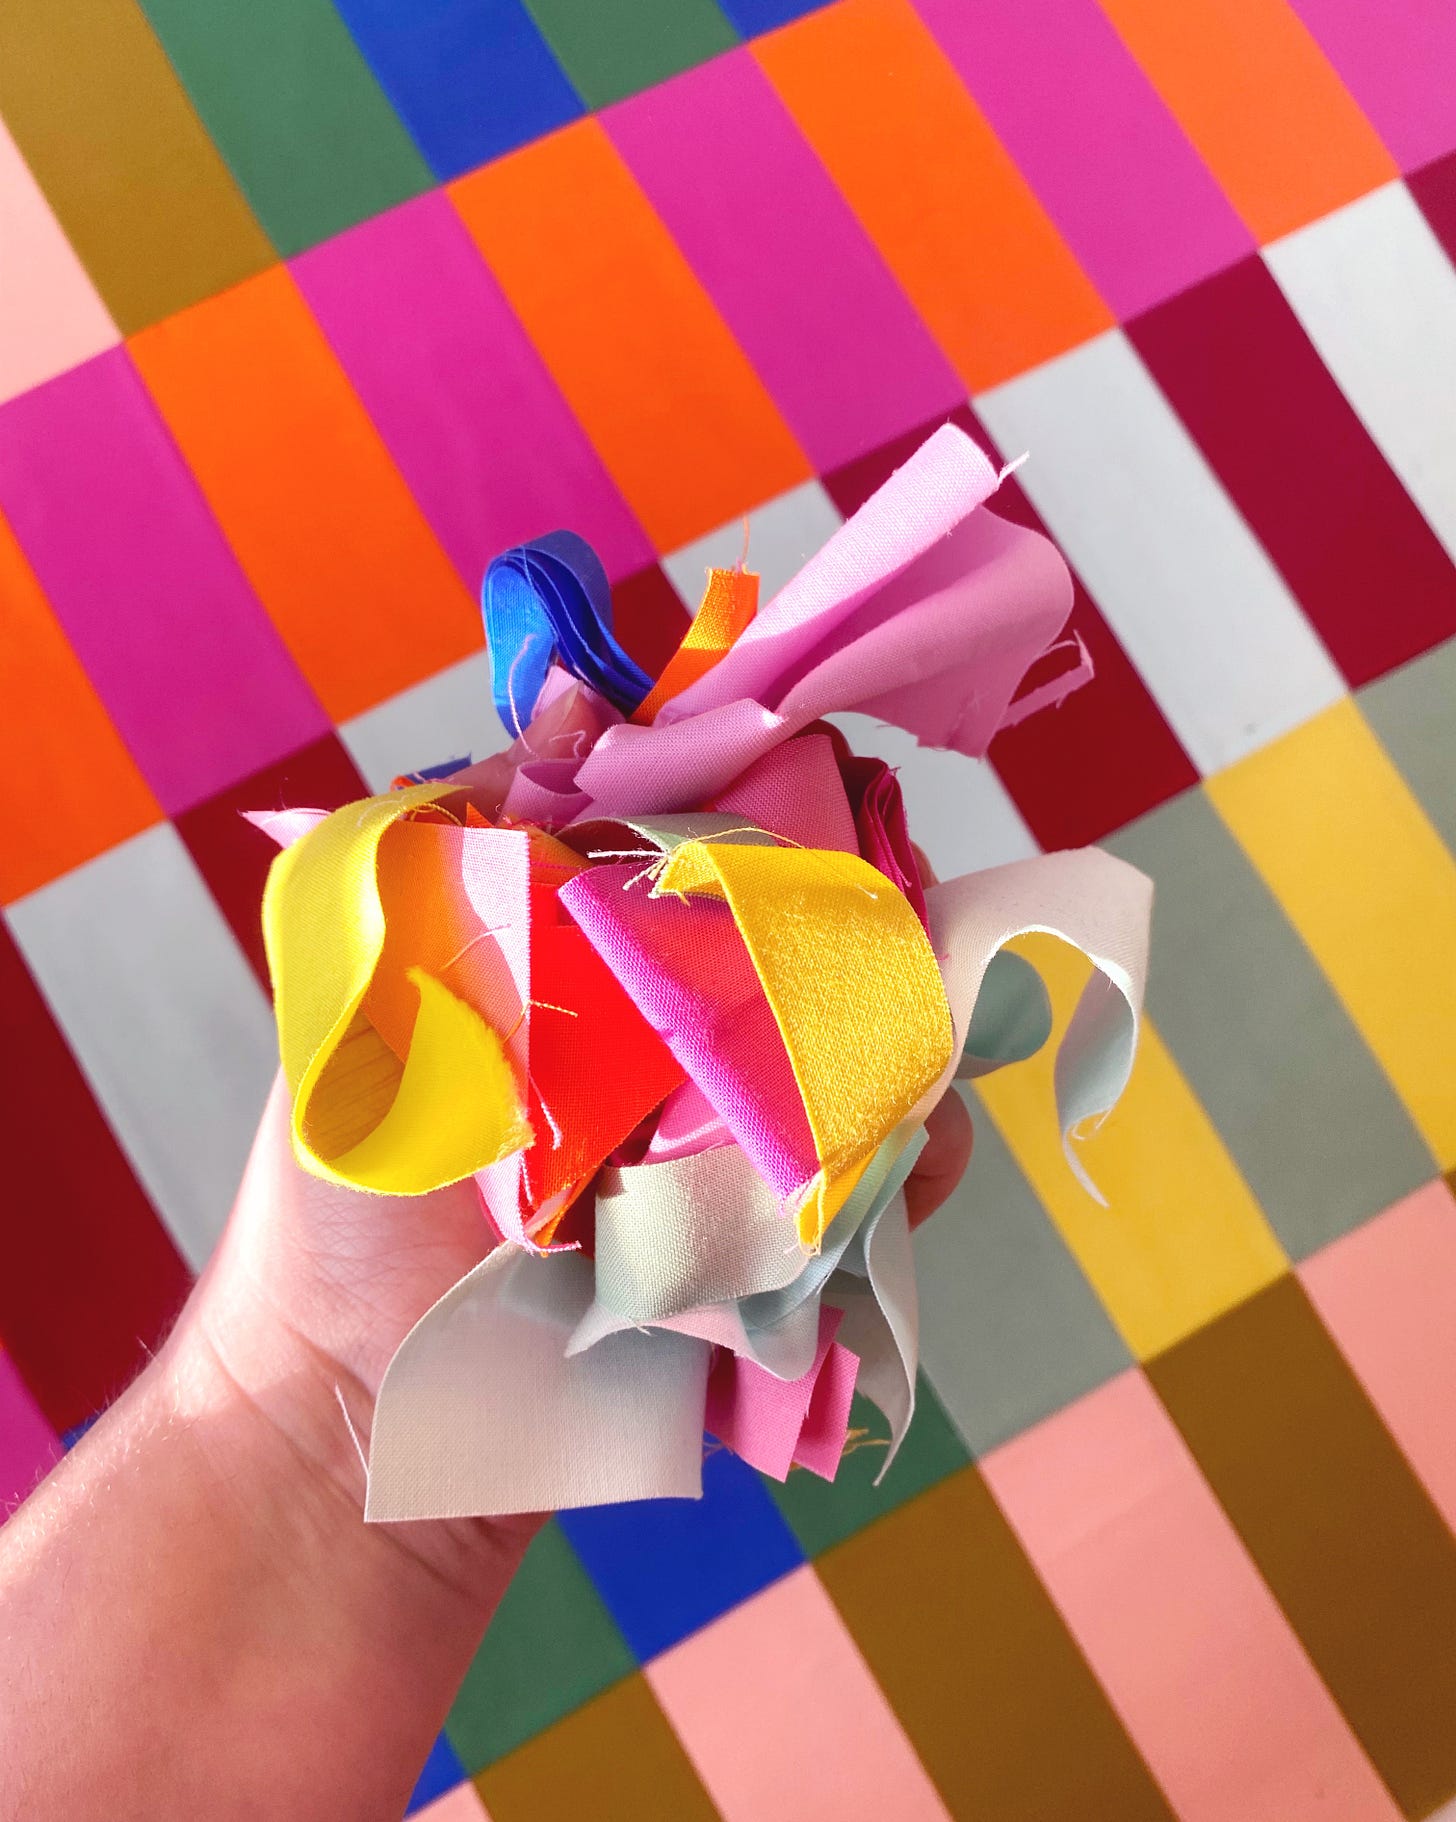 Hand of a white person holds colorful scrap fabrics in front of a colorful quilted background